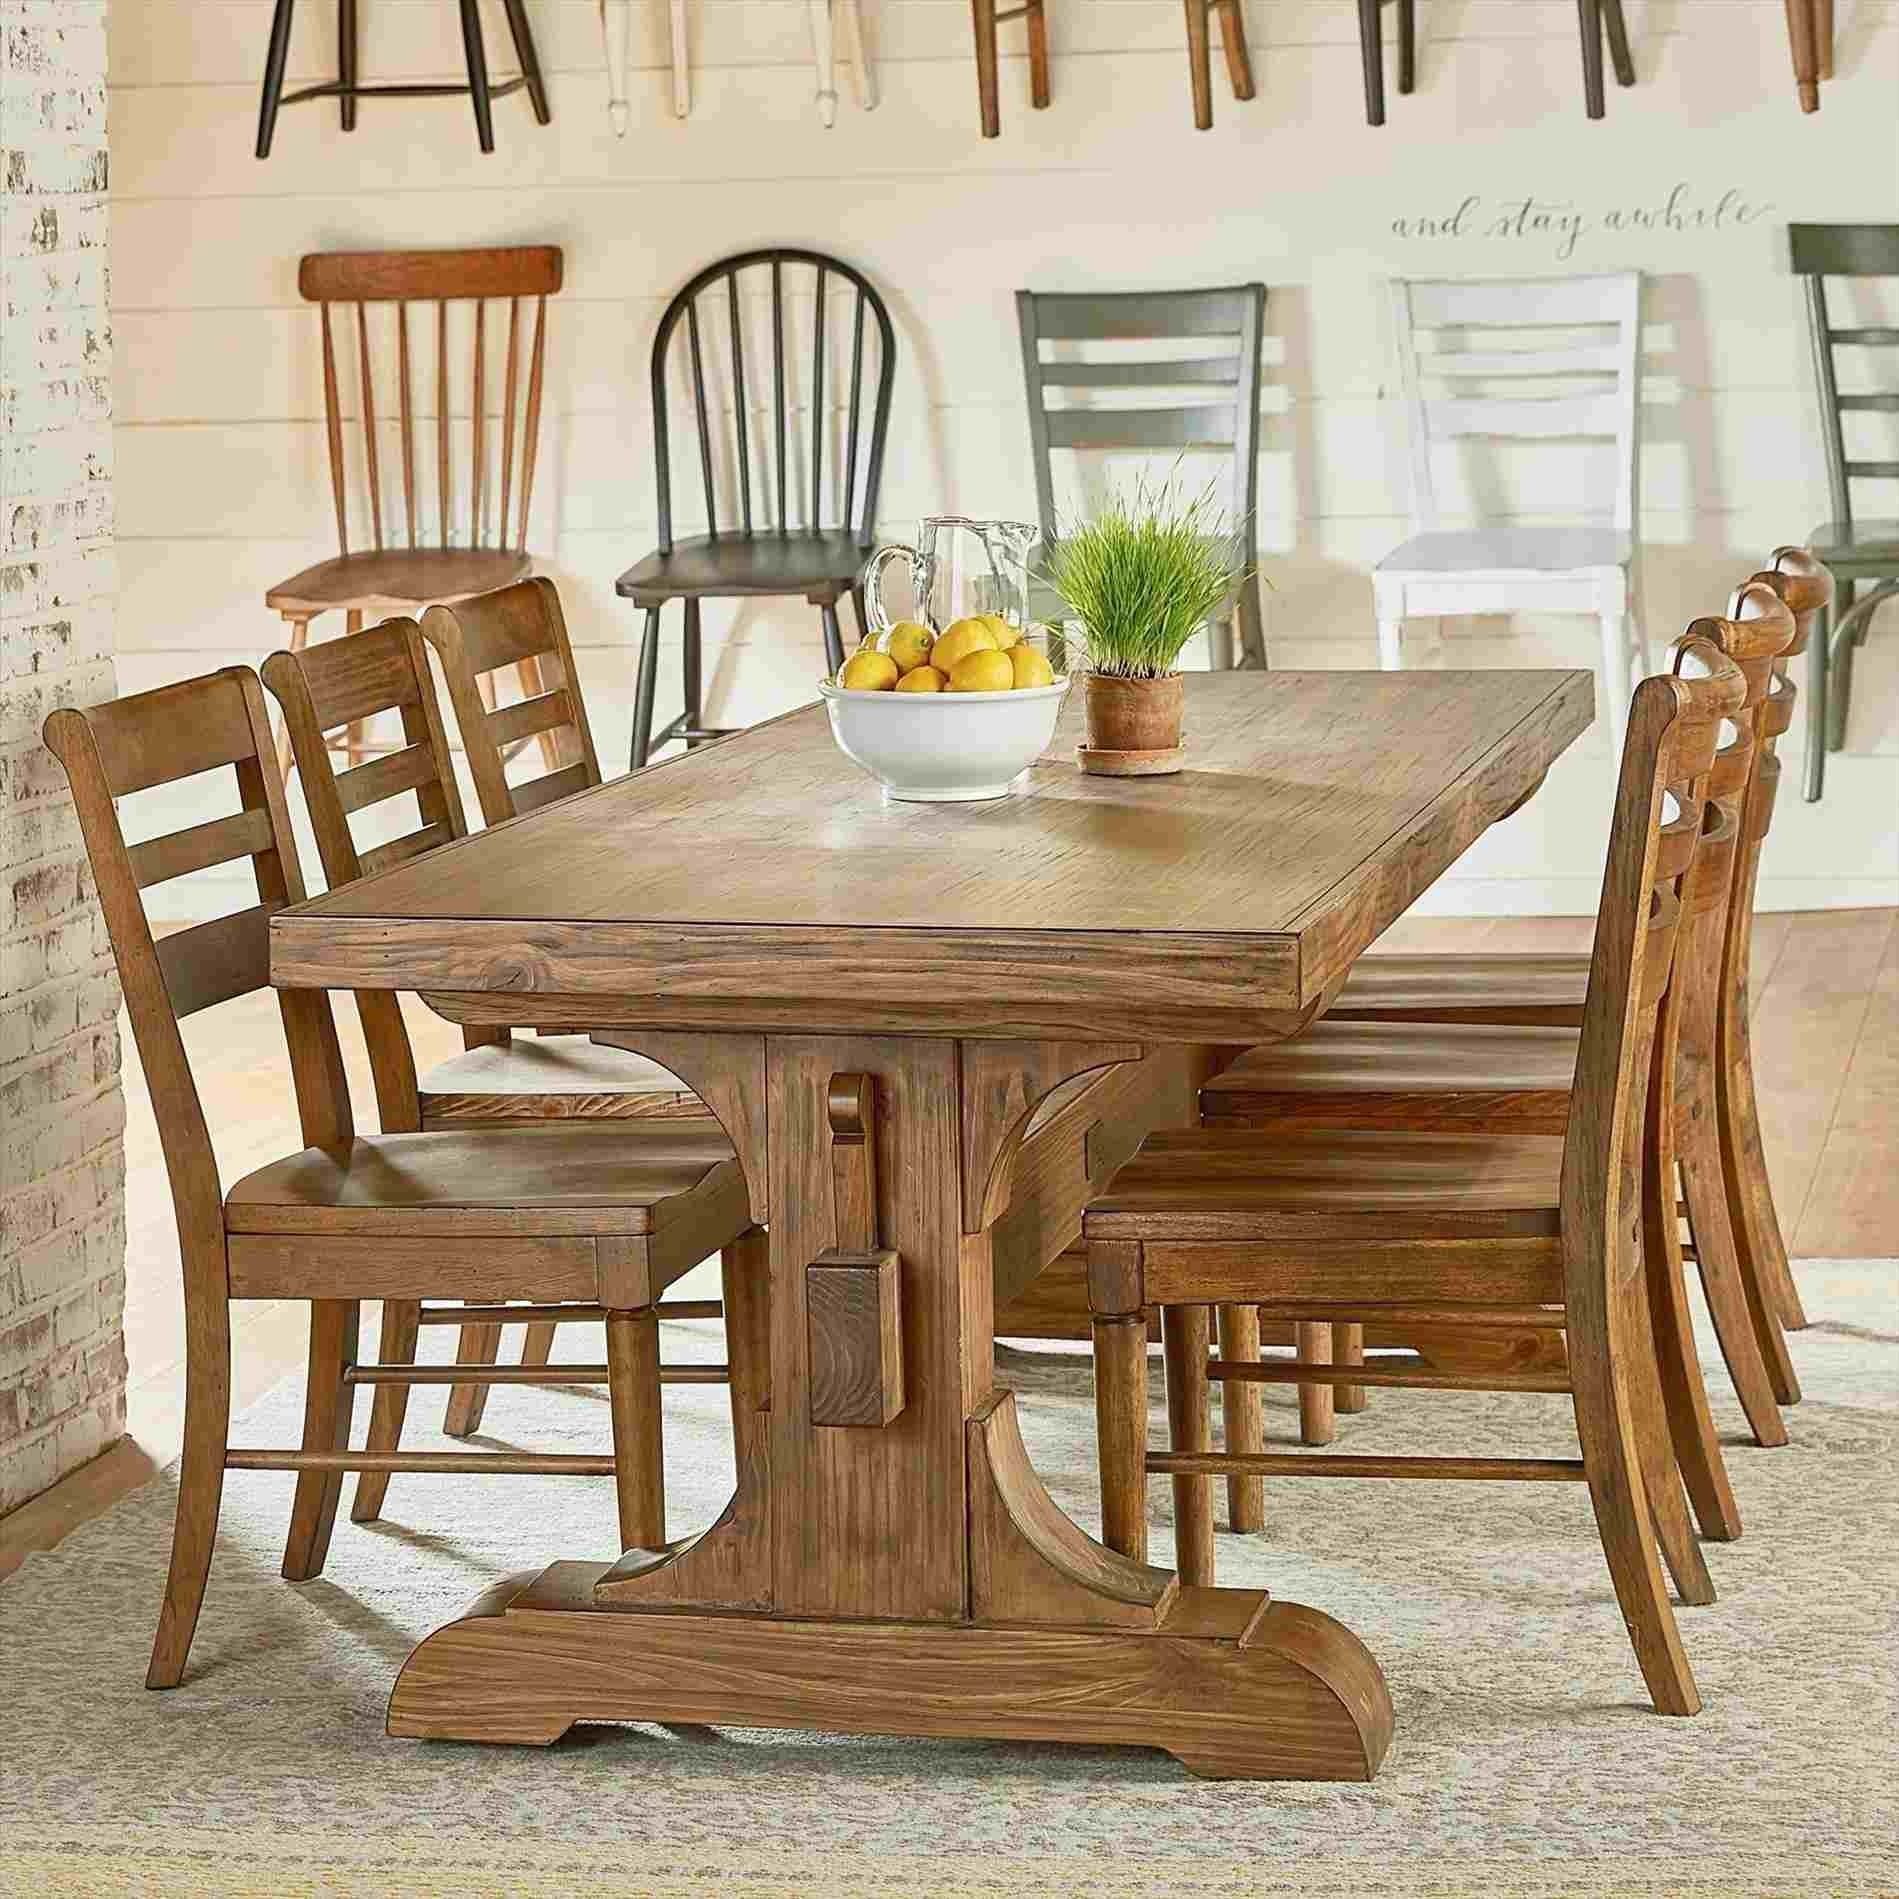 Joanna Gaines Farmhouse Dining Table | National12K With Regard To Latest Magnolia Home Breakfast Round Black Dining Tables (View 9 of 20)